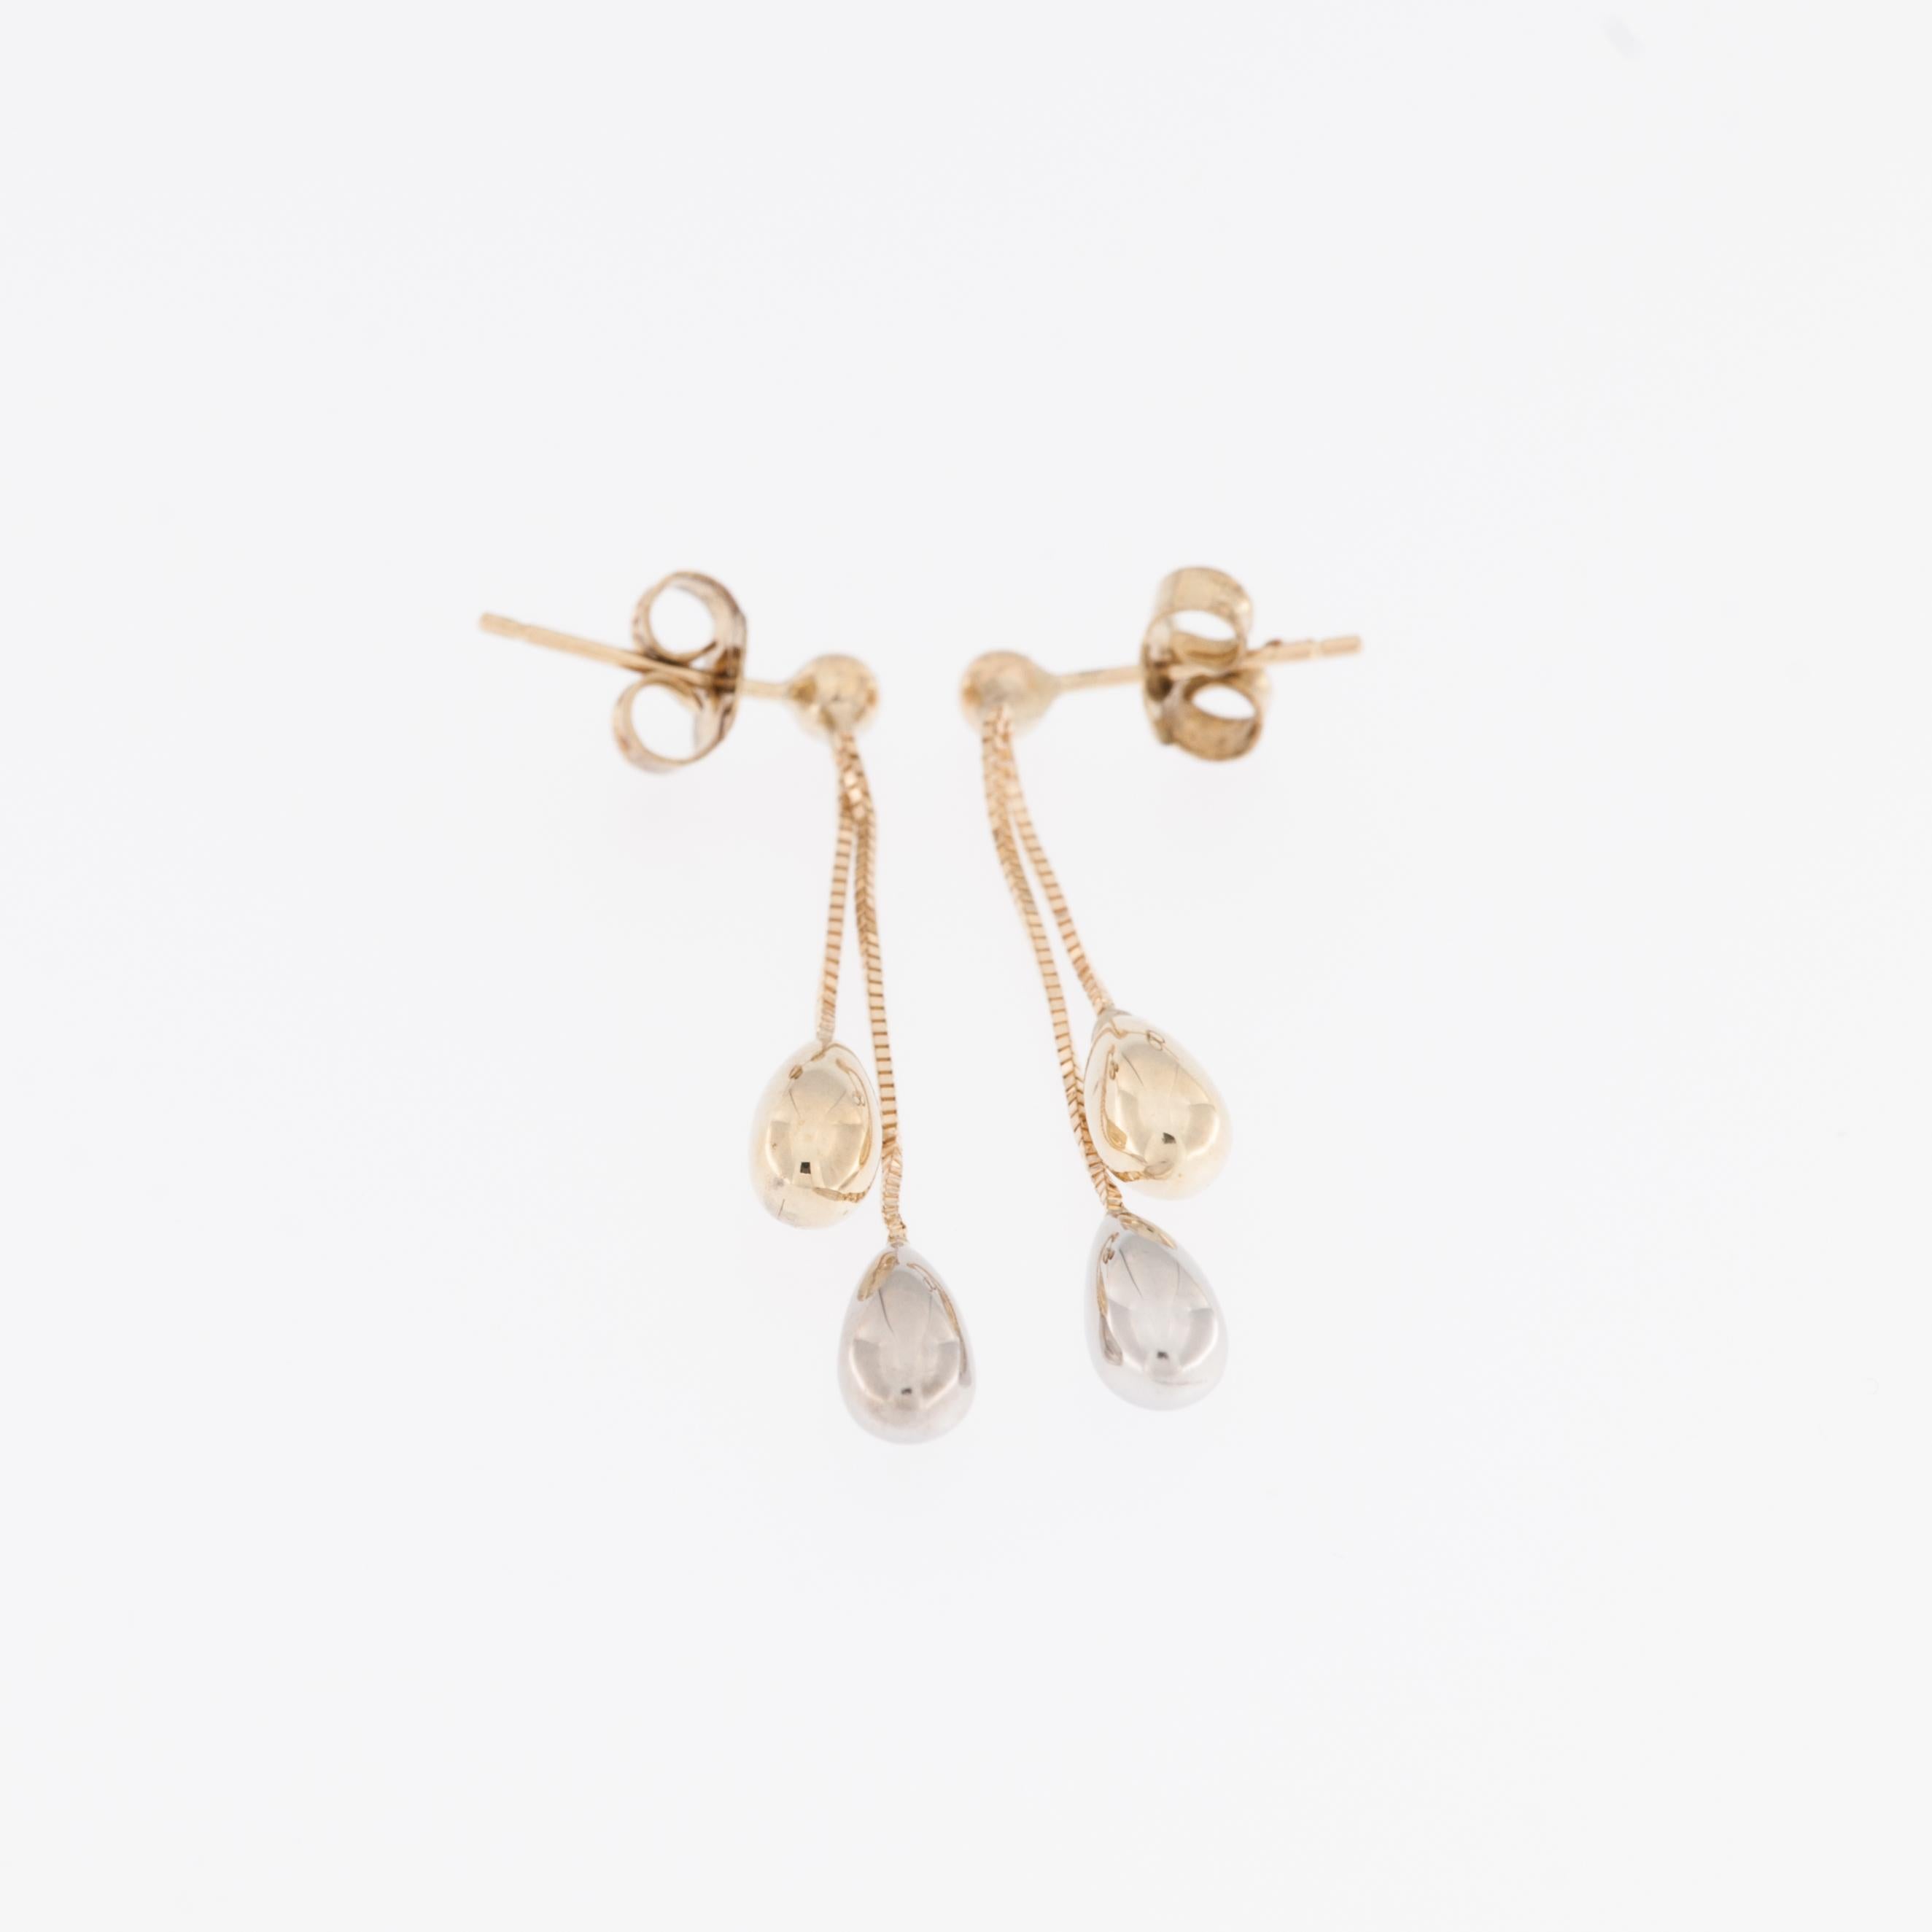 The Italian 14kt Yellow and White Gold Drop Earrings are an elegant piece of jewelry that combines two precious metals to create a captivating design. 

These earrings are crafted from high-quality Italian 14-karat (14kt) gold, which is known for